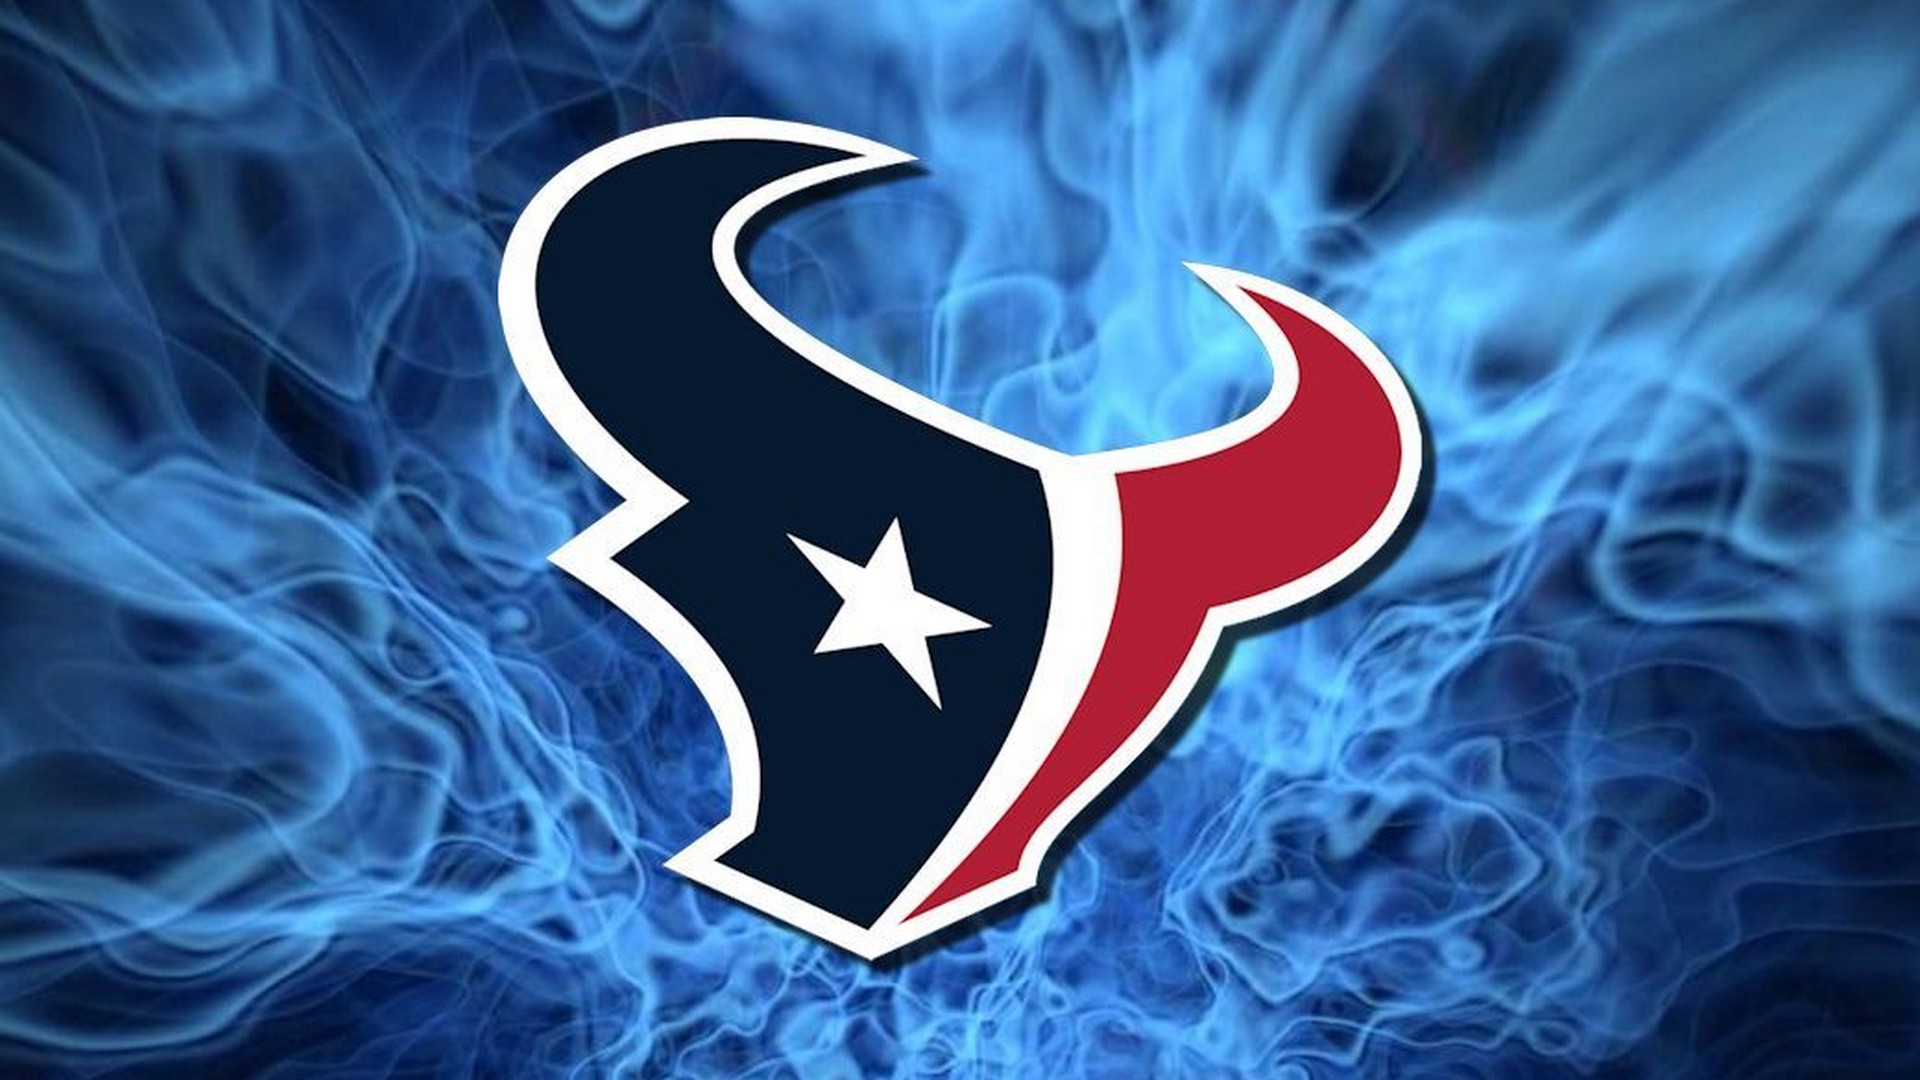 1920x1080 Houston Texans NFL For PC Wallpaper with resolution  pixel. You  can make this wallpaper